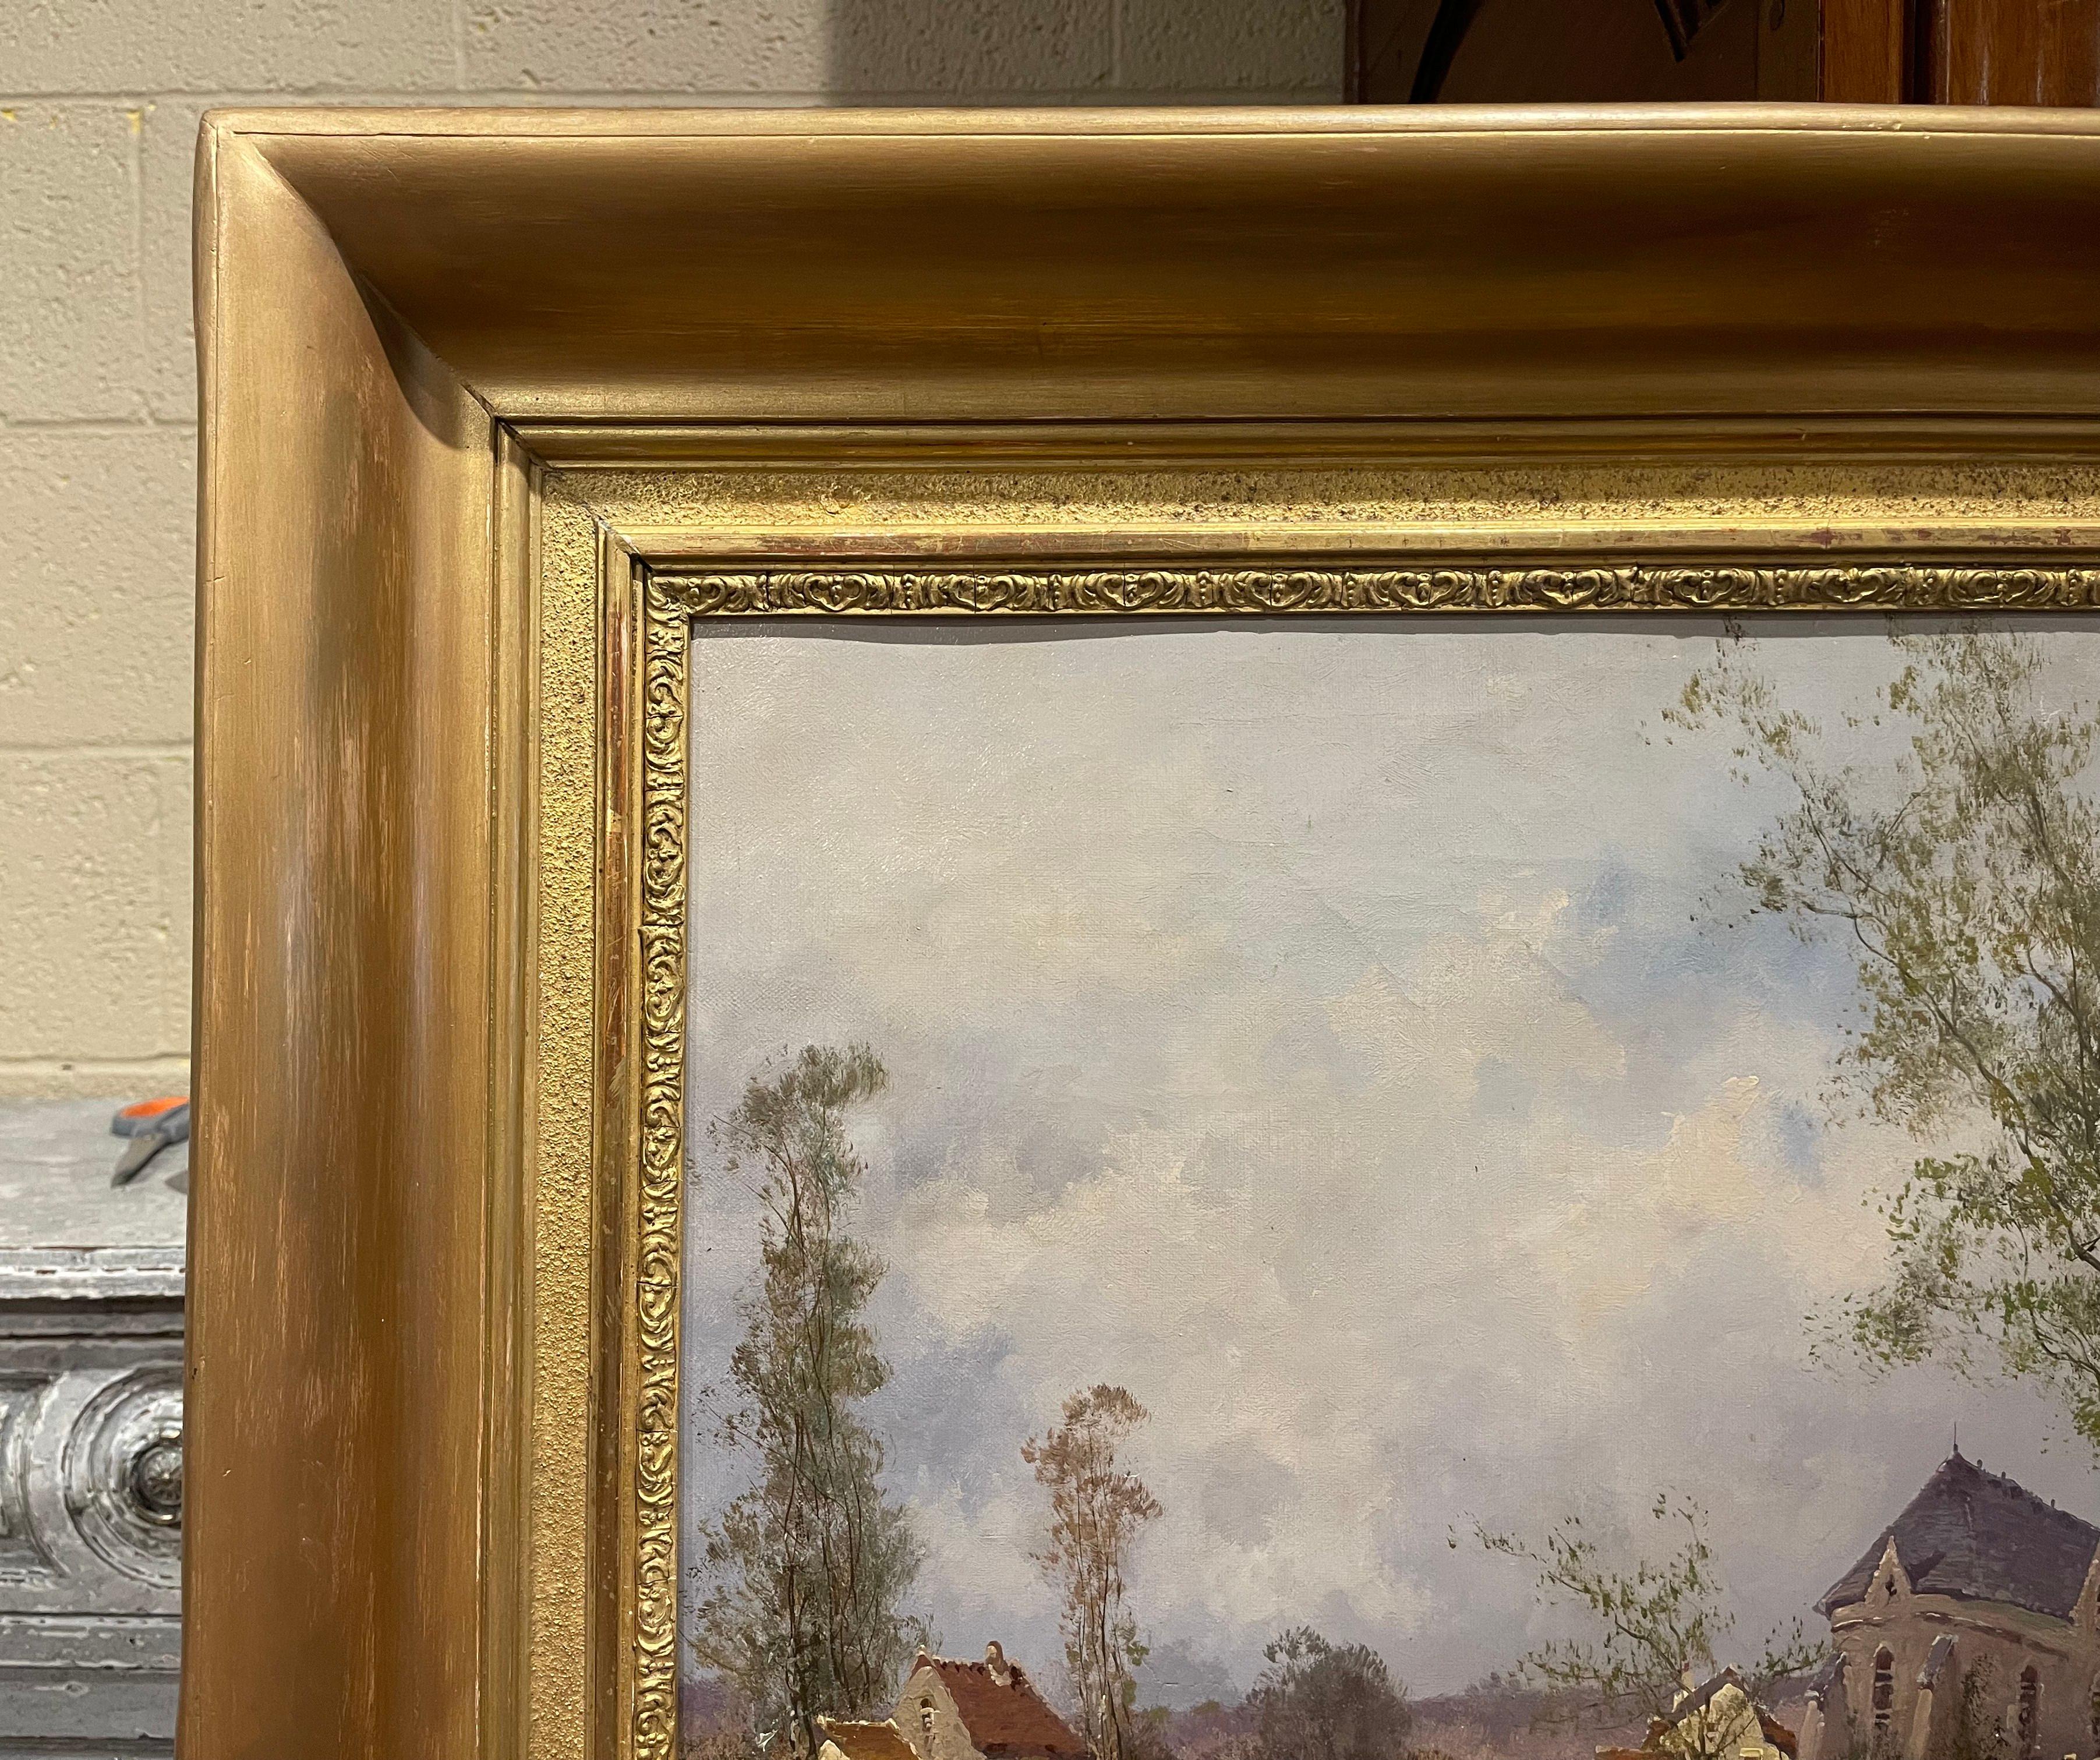 Giltwood 19th Century Framed Landscape Oil Painting Signed Languinais for Galien-Laloue For Sale